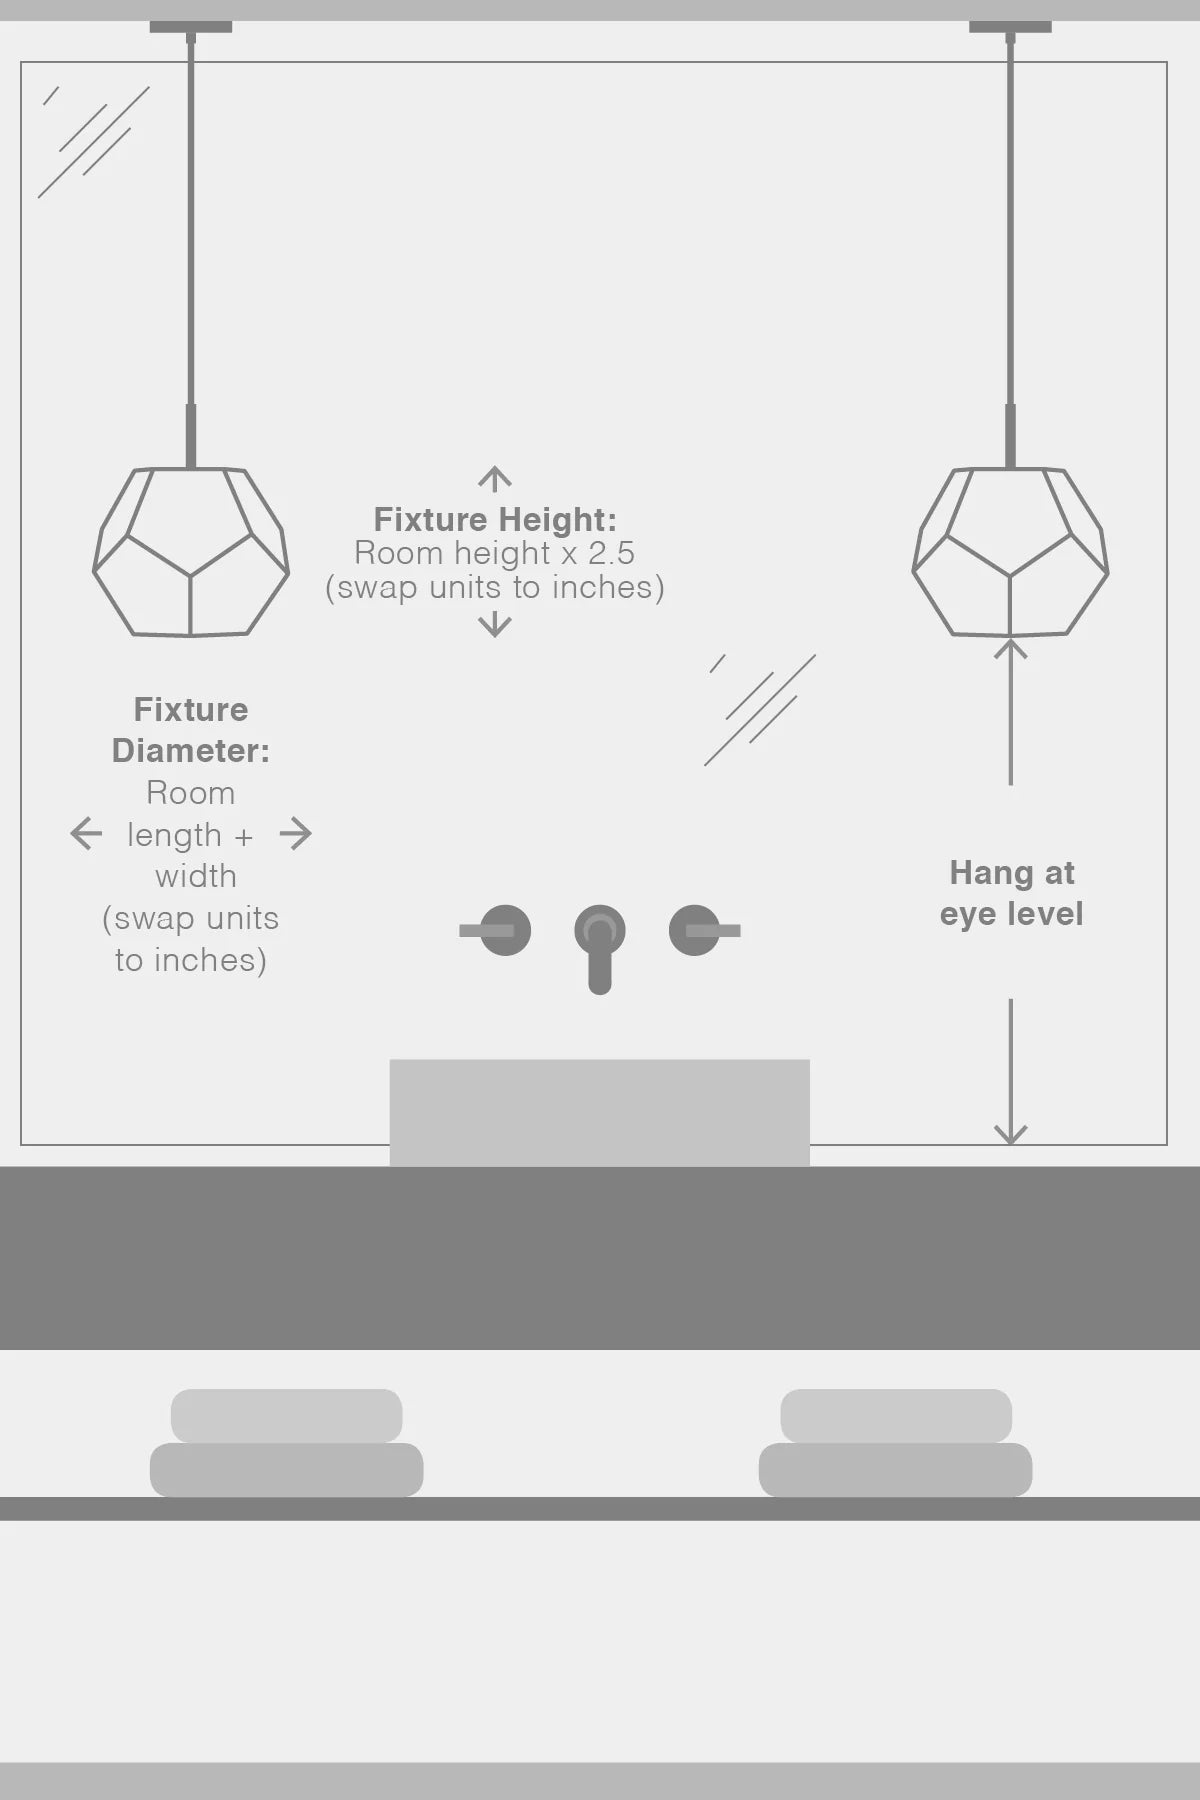 Diagram showing the recommended height for hanging lighting fixtures in a bathroom.